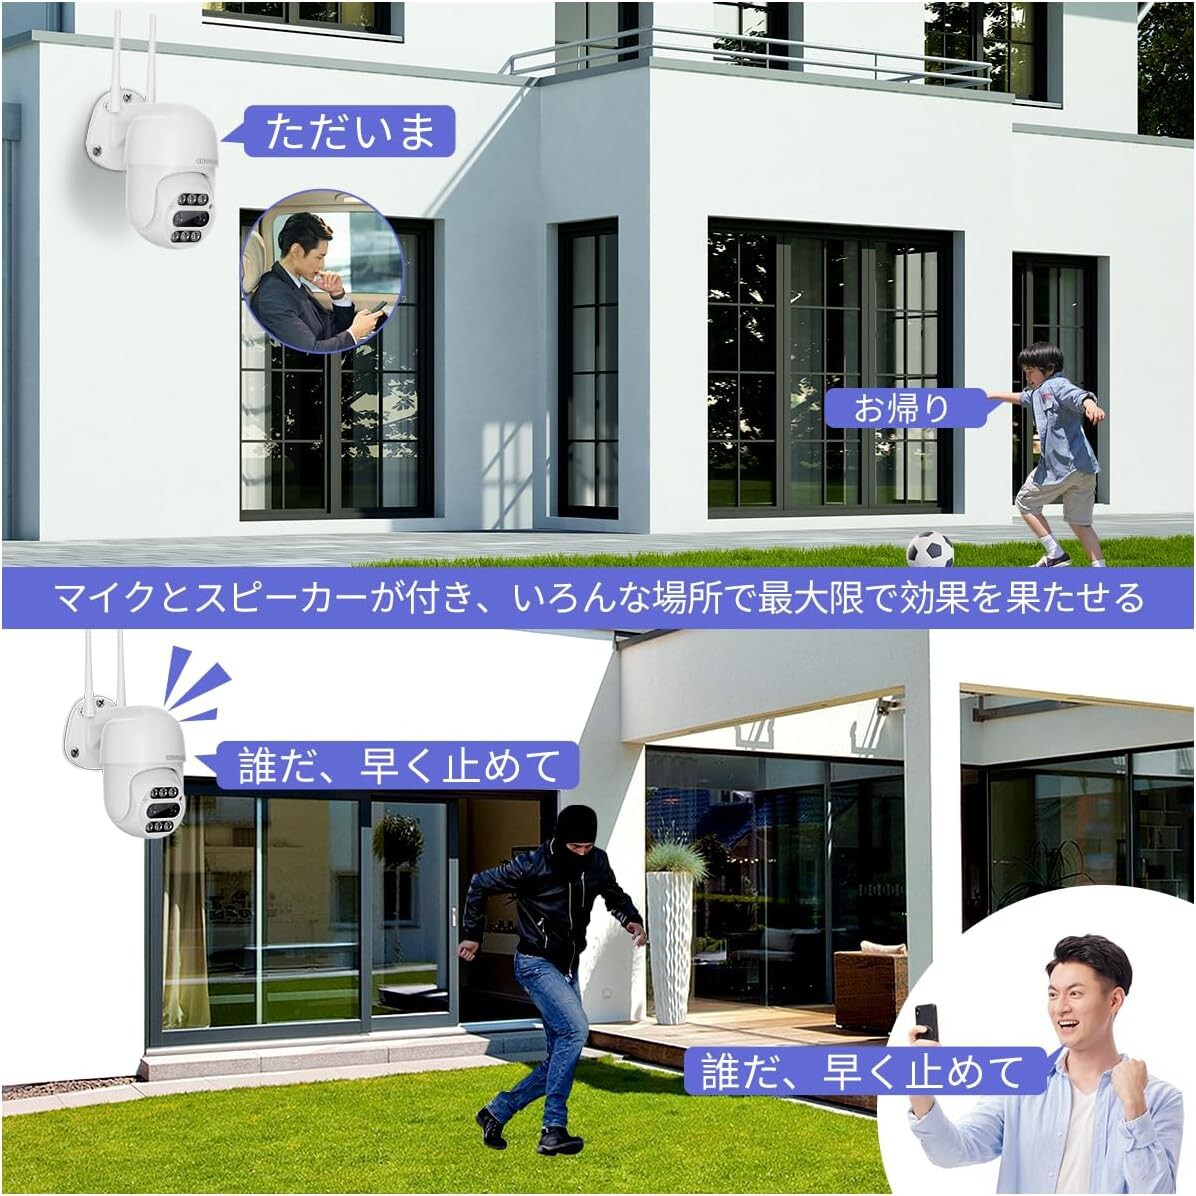  free shipping interactive telephone call ] security camera wireless monitor outdoors security camera set 4 pcs wireless security camera monitor set (400 ten thousand pixels )